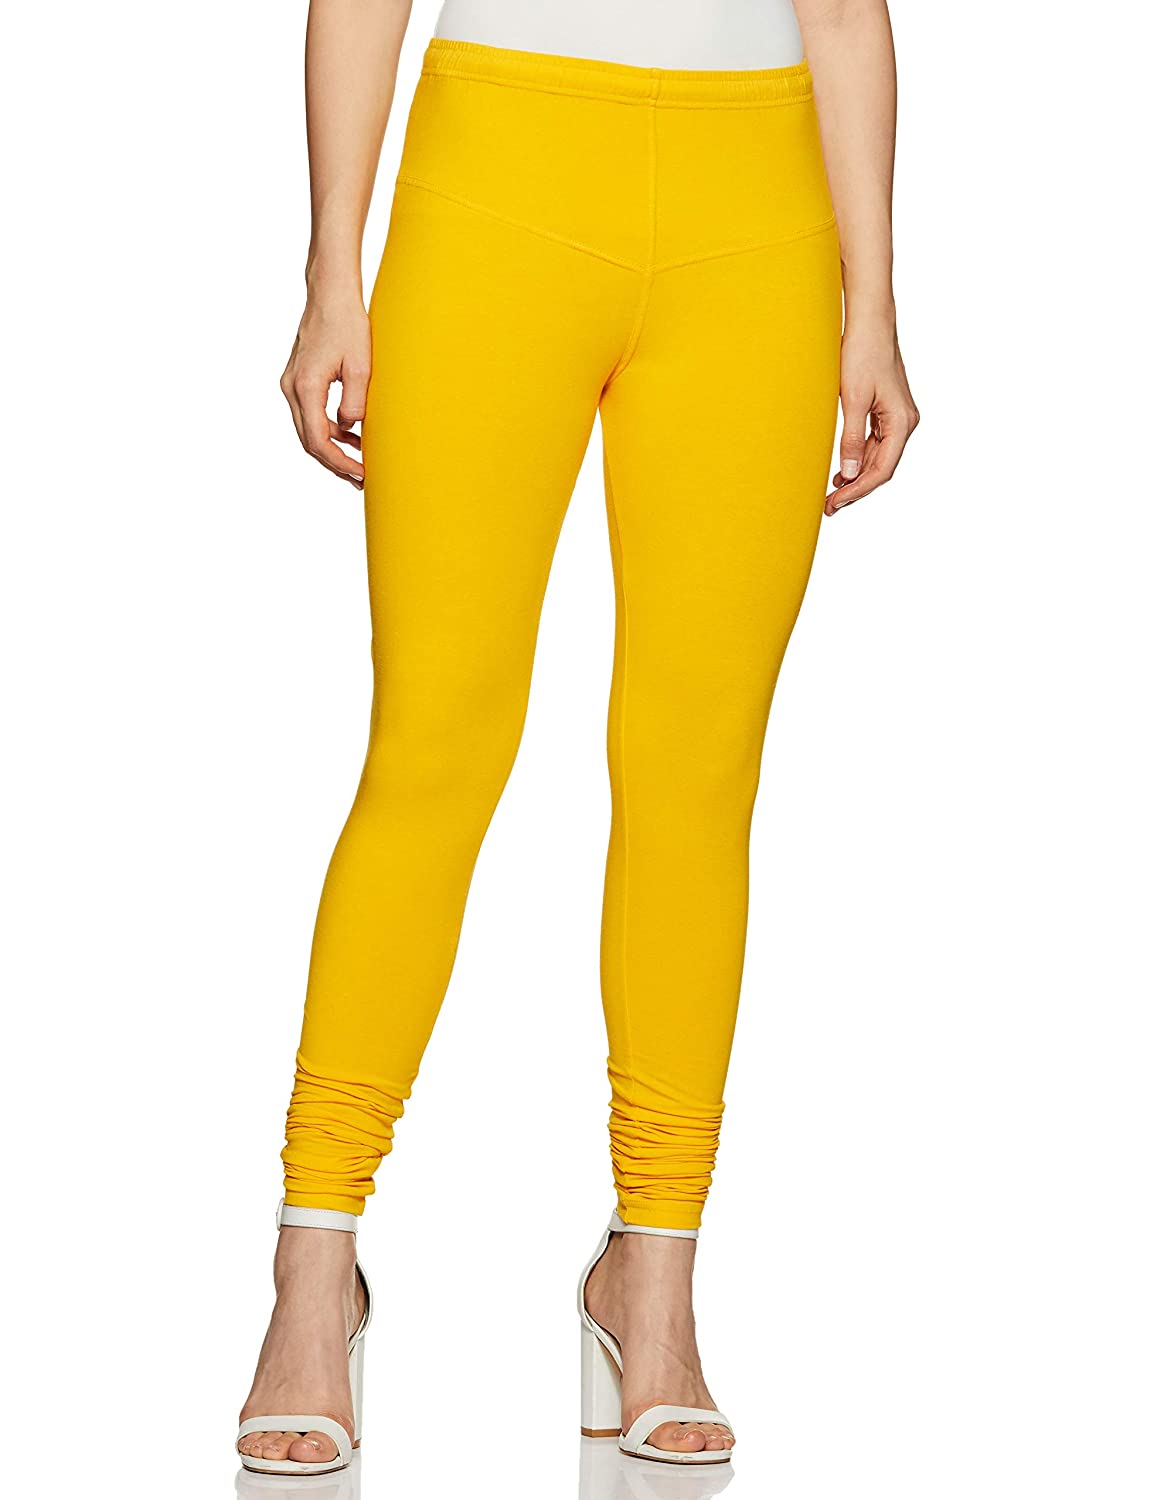 Lady Rose Yellow Churidar Legging in Dandeli at best price by Lady